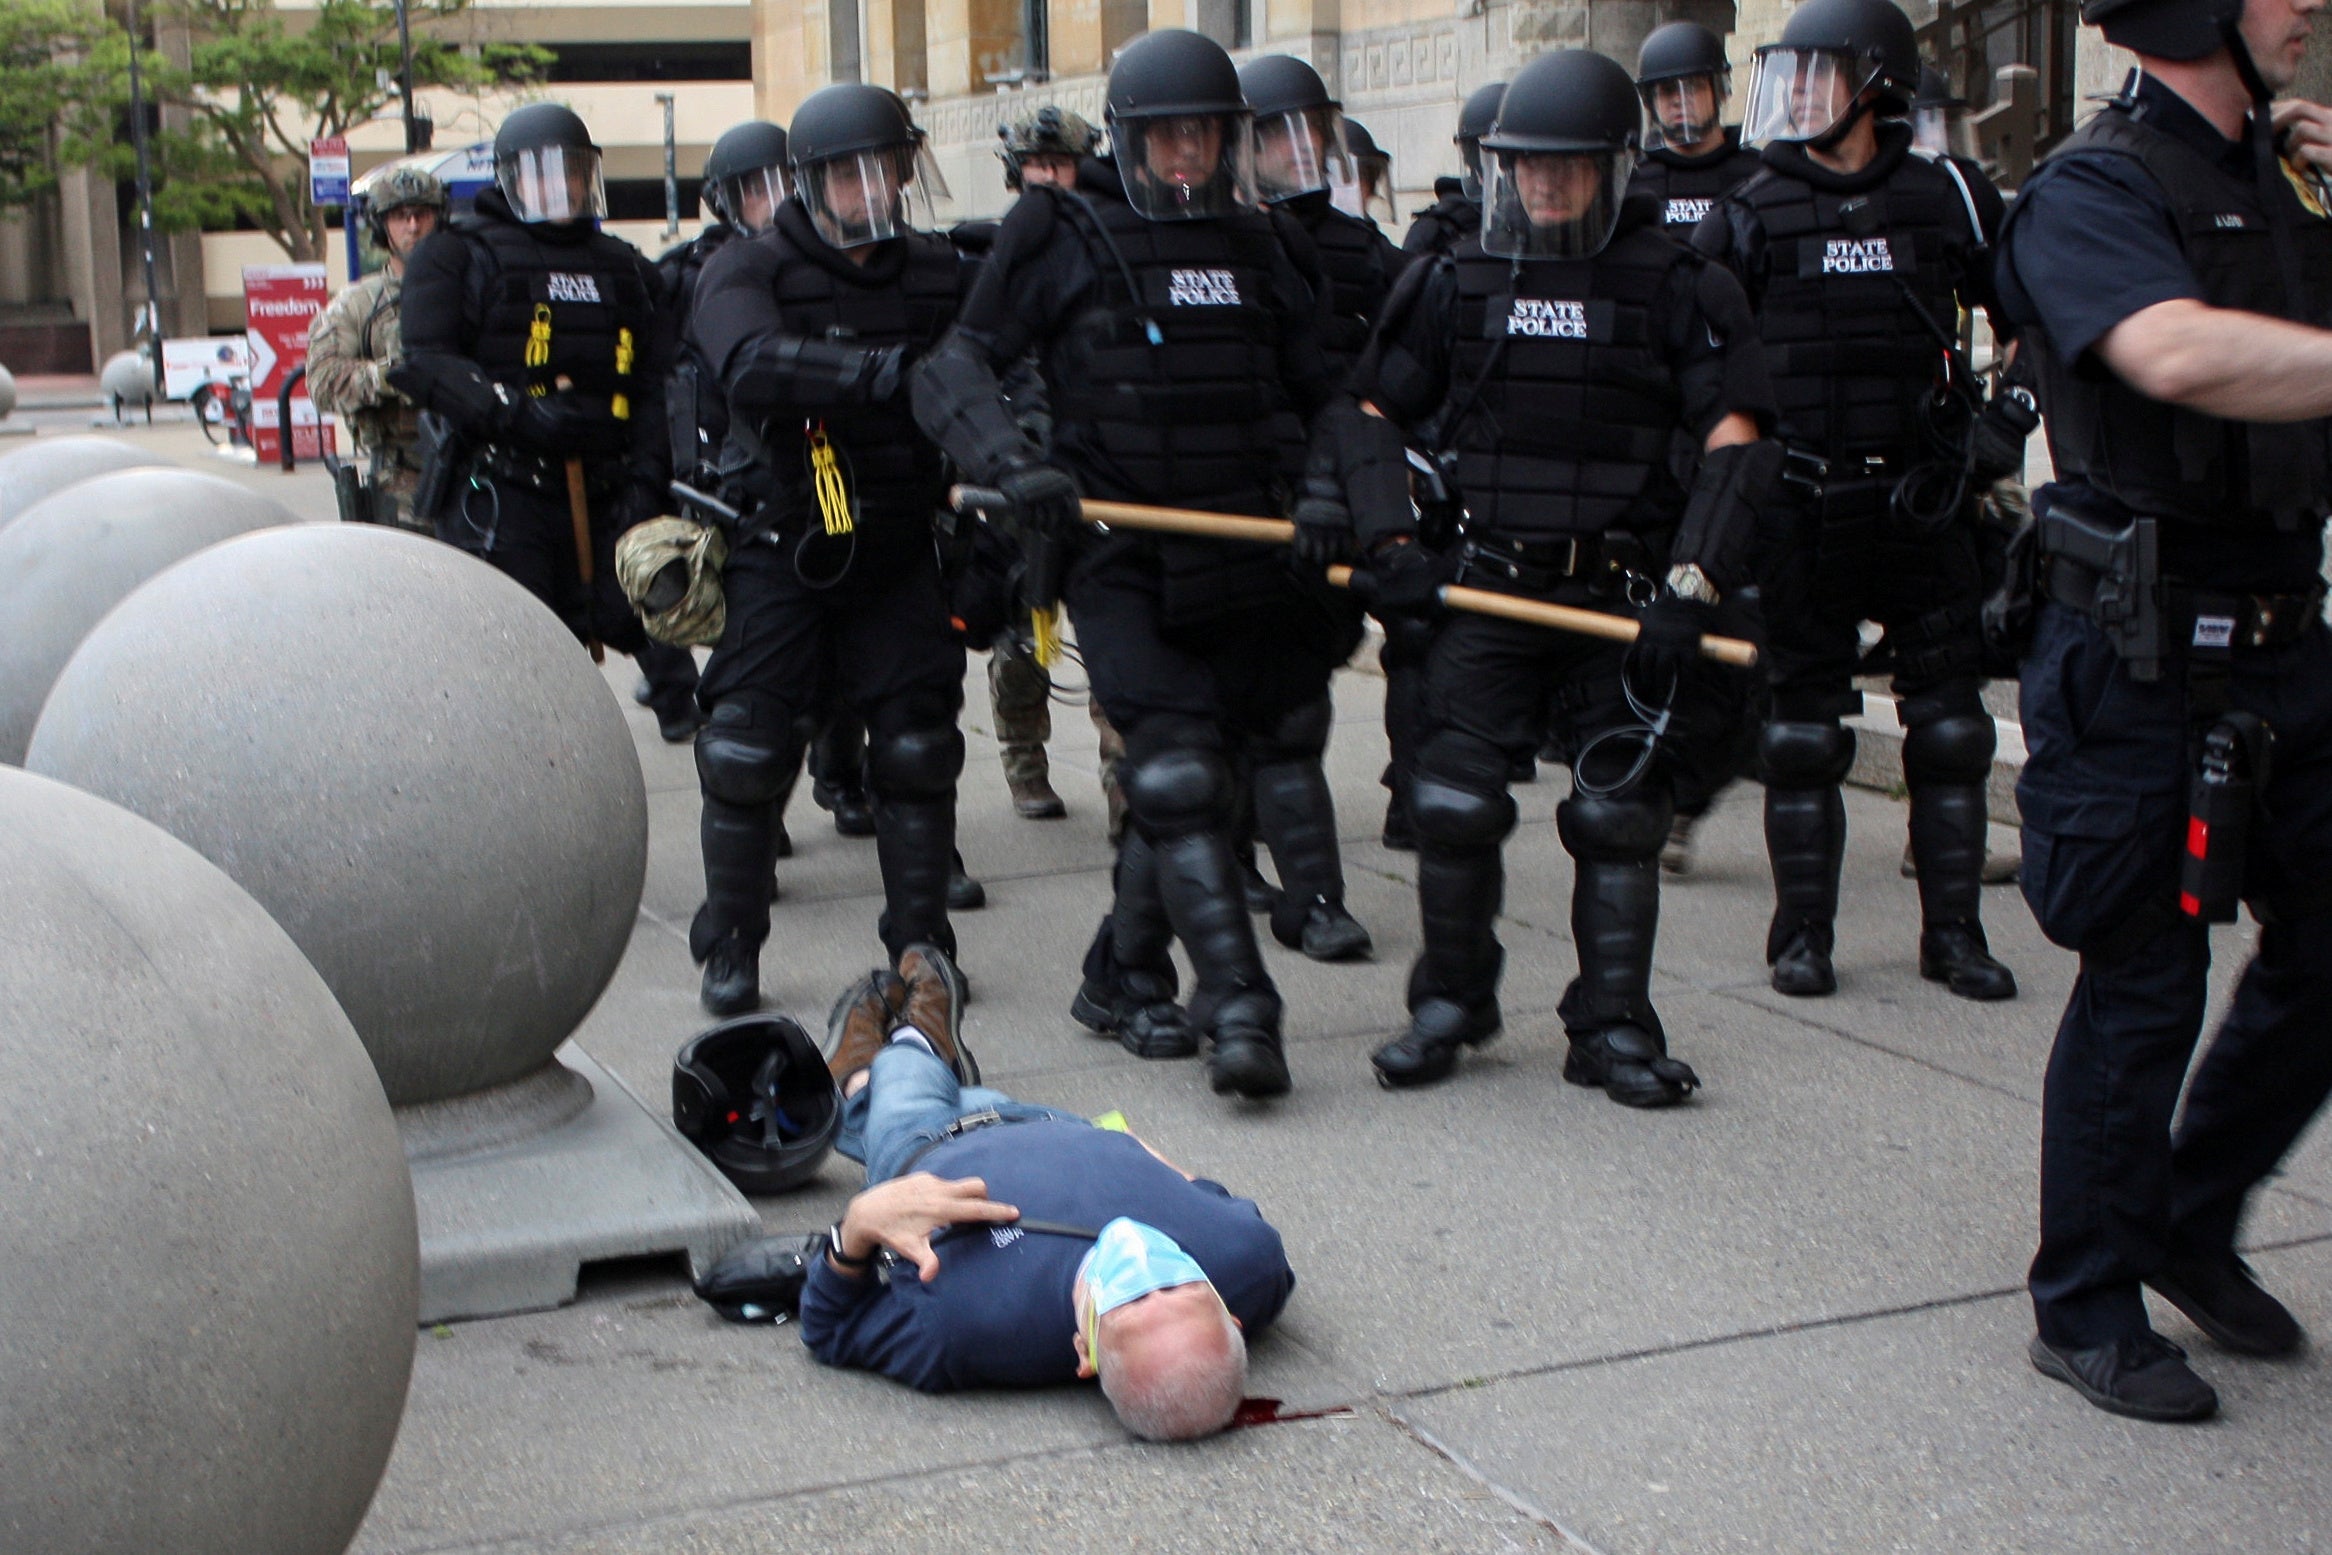 Martin Gugino, a 75-year-old protester, lays on the ground after he was shoved by two Buffalo, New York, police officers during a protest against the death in Minneapolis police custody of George Floyd in Niagara Square in Buffalo, New York, on June 4, 2020. 